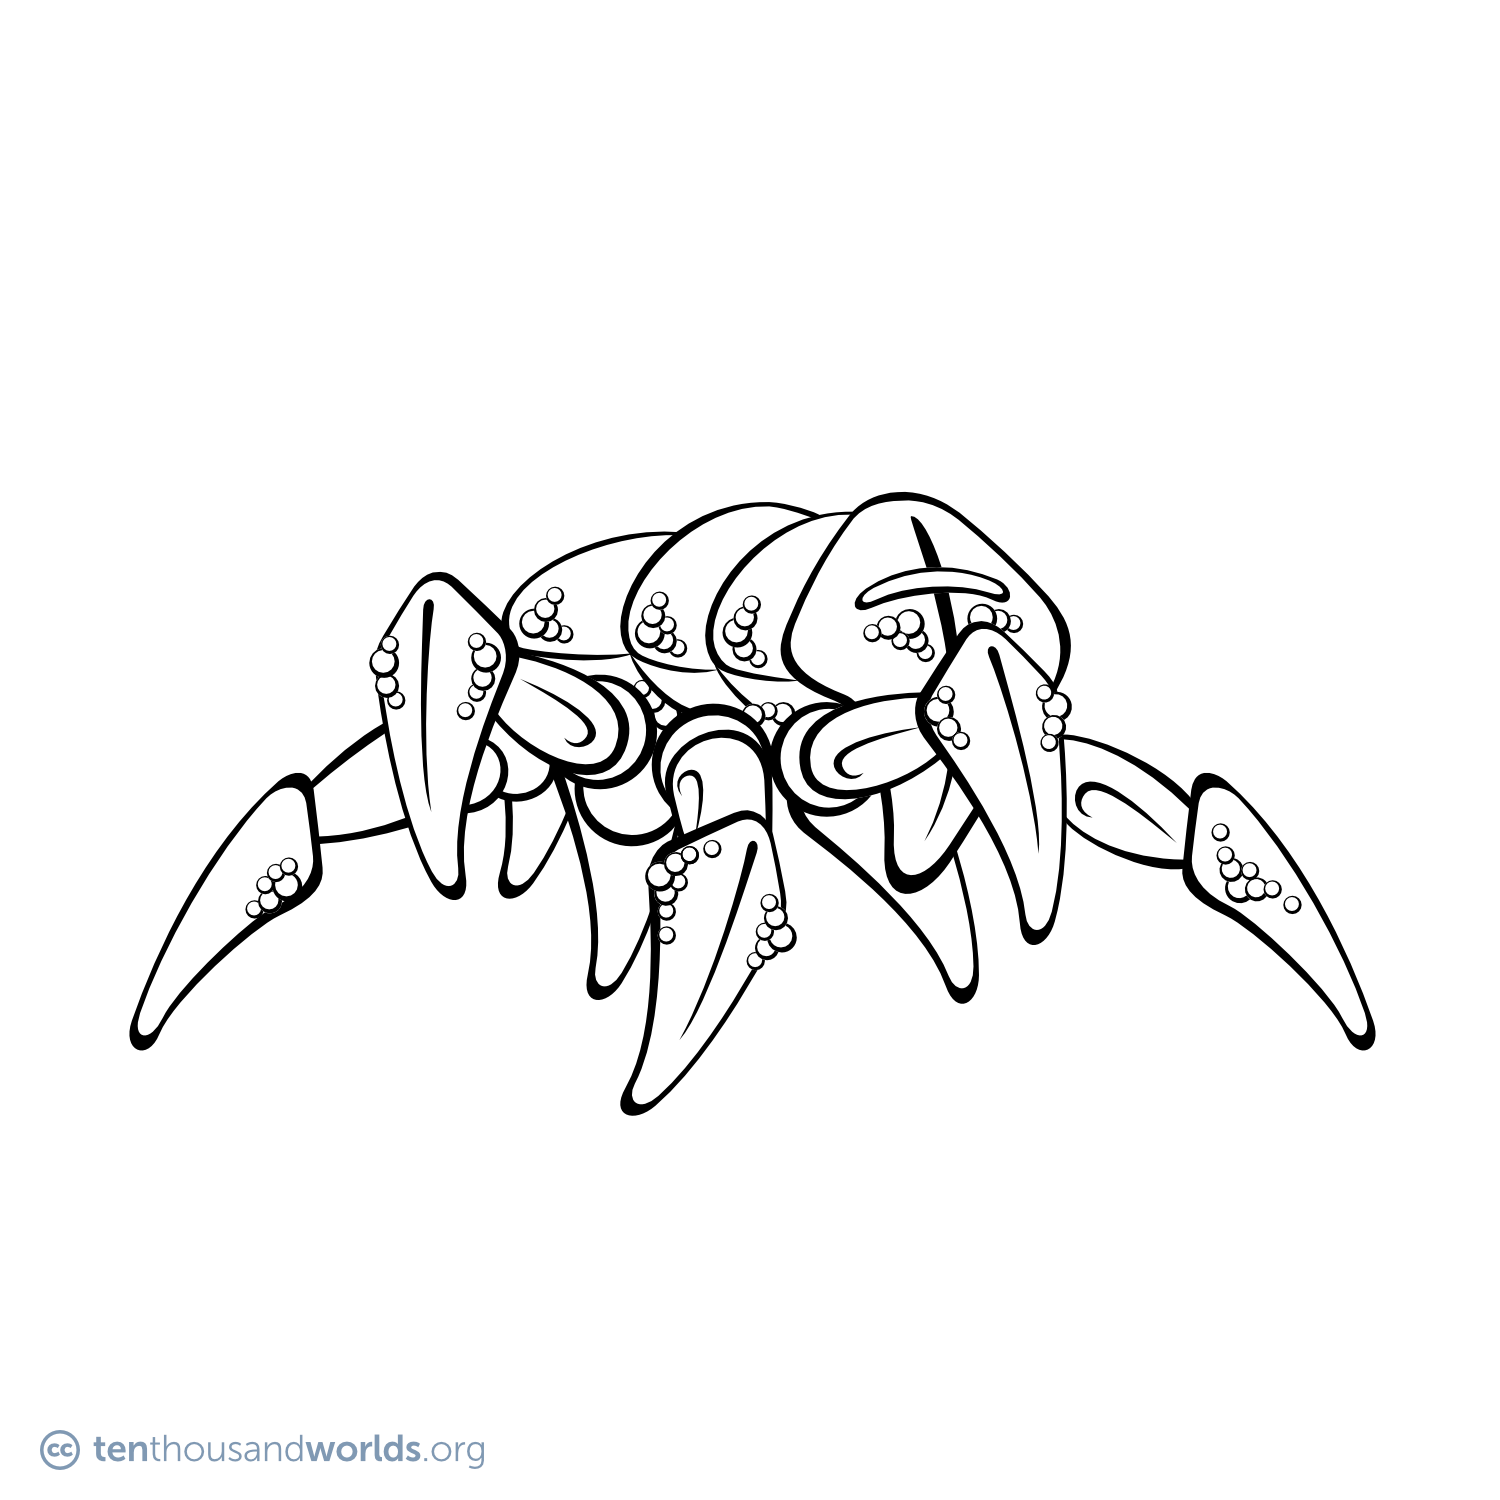 An ink outline of an eight-legged machine resembling a cross between a spider and a crab, with a pebble-like texture, and a face like a tall shield with a viewing slit.